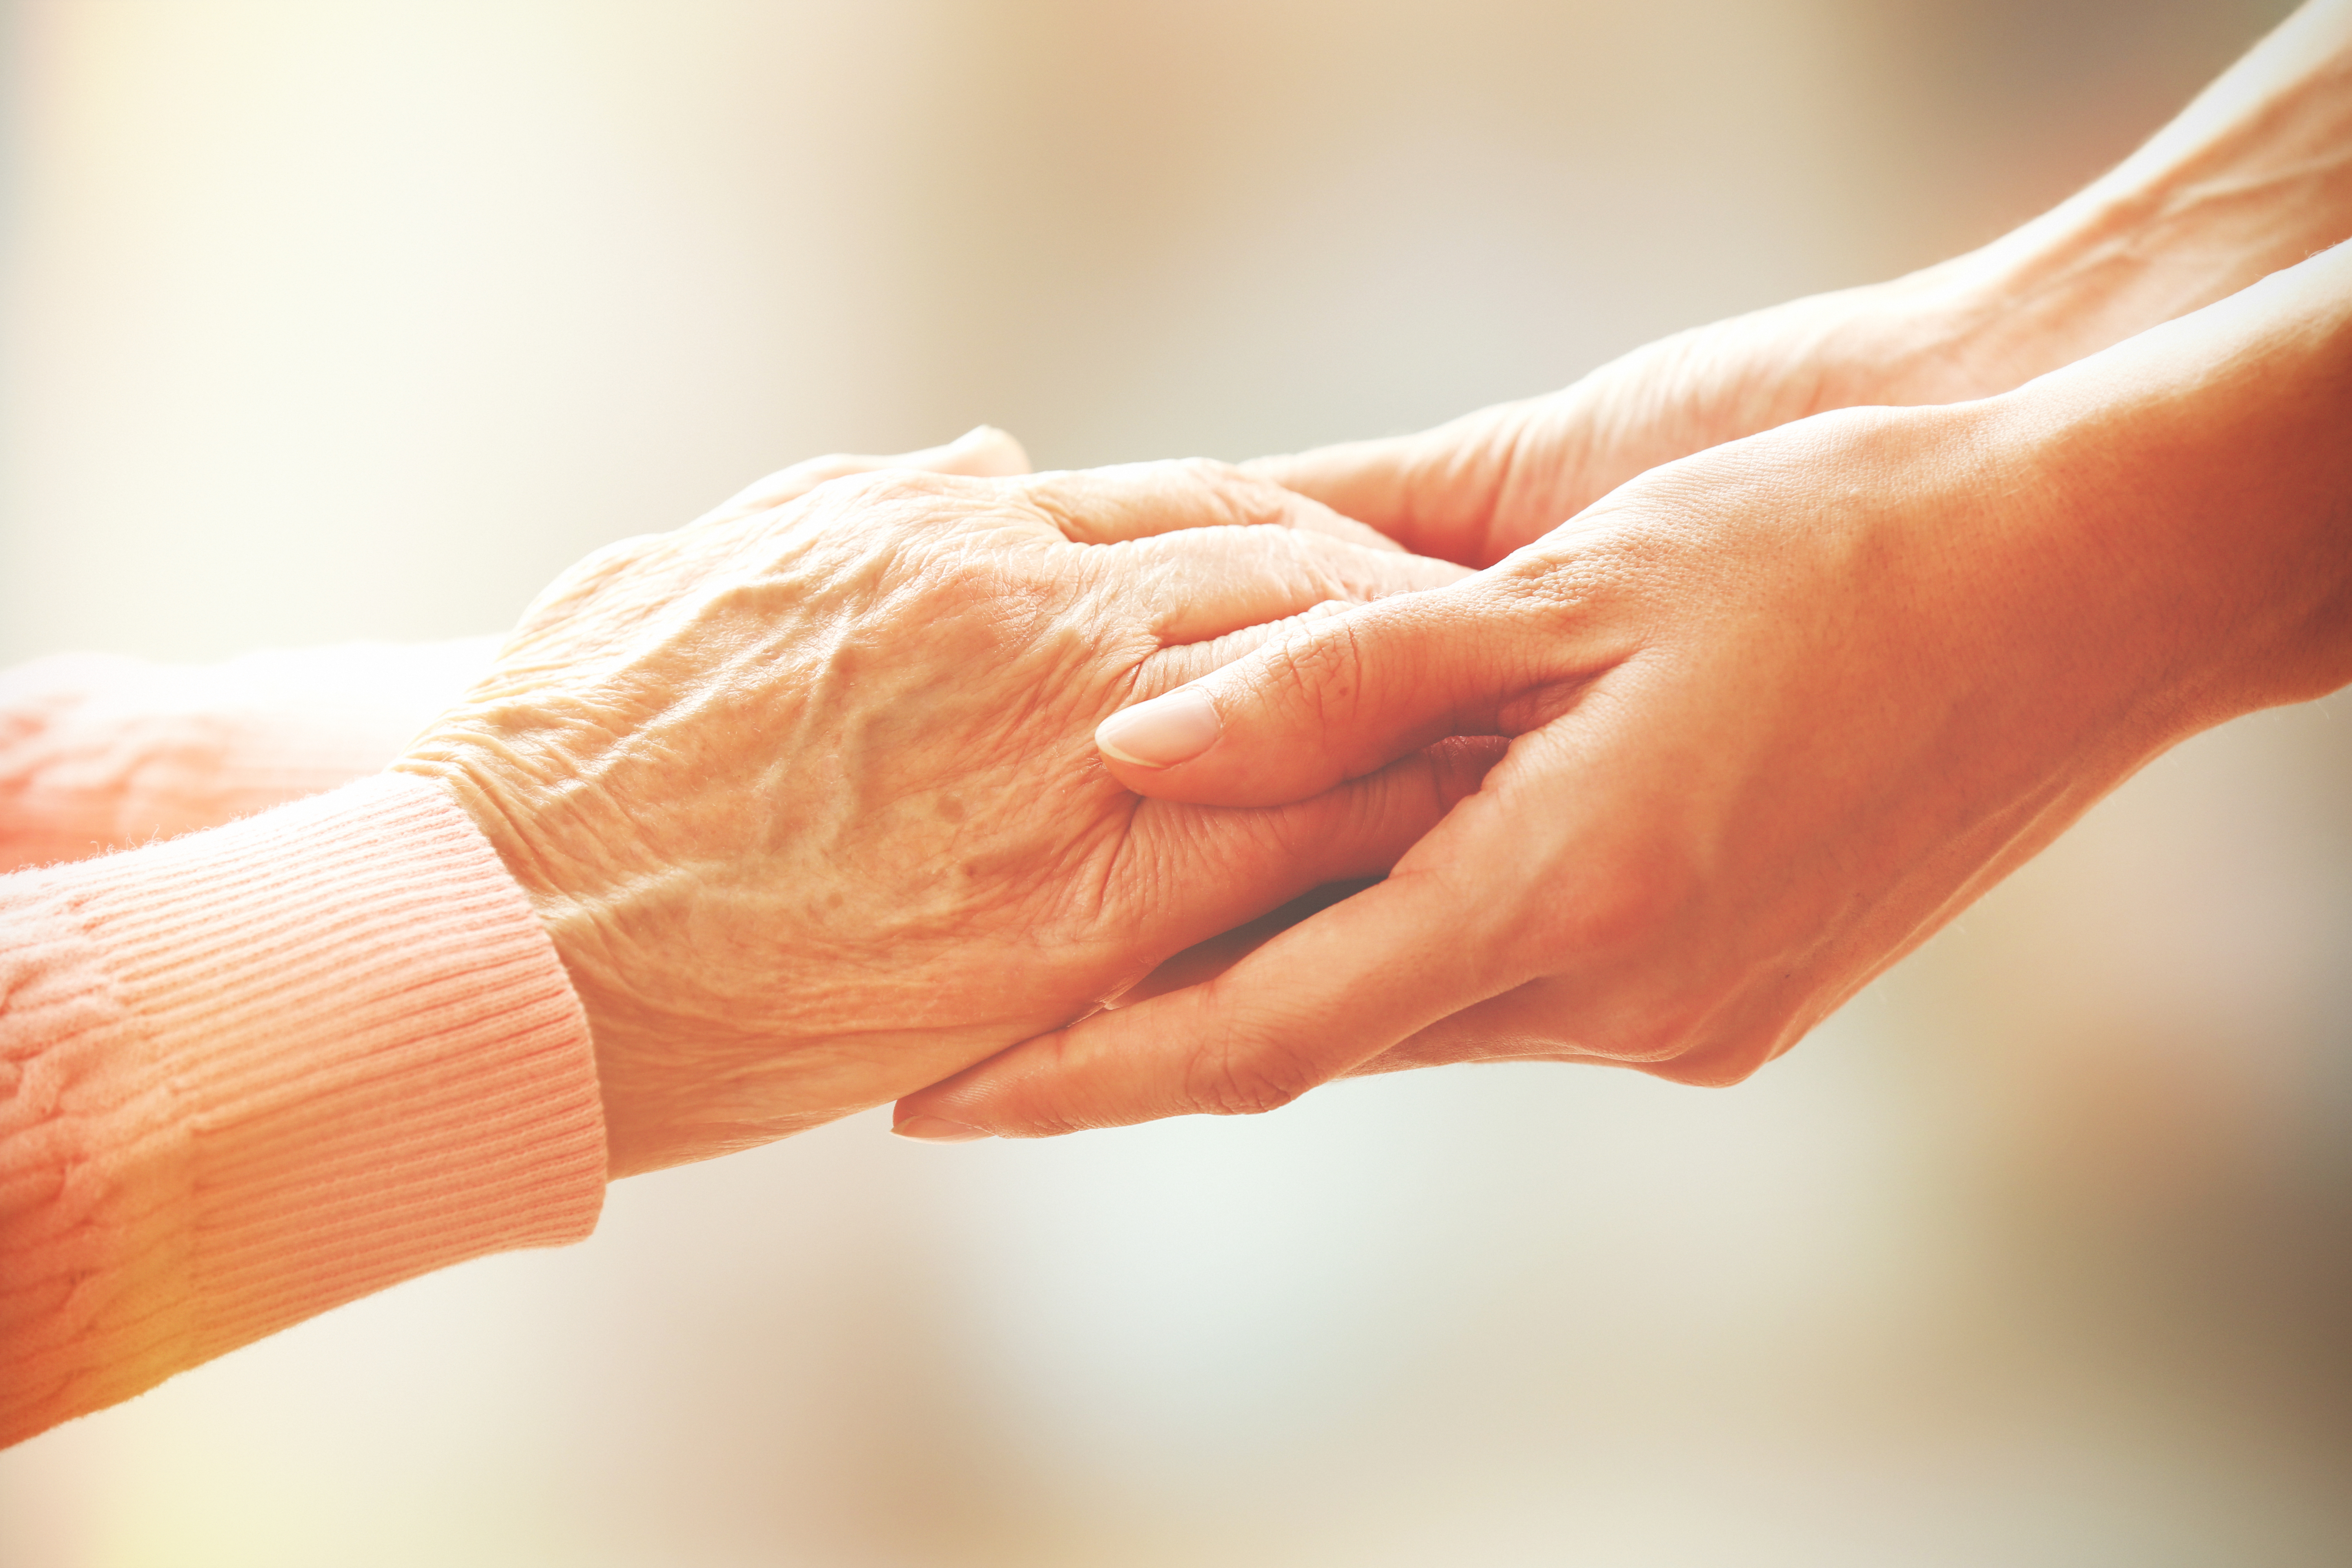 A young pair of hands holding an elderly pair of hands